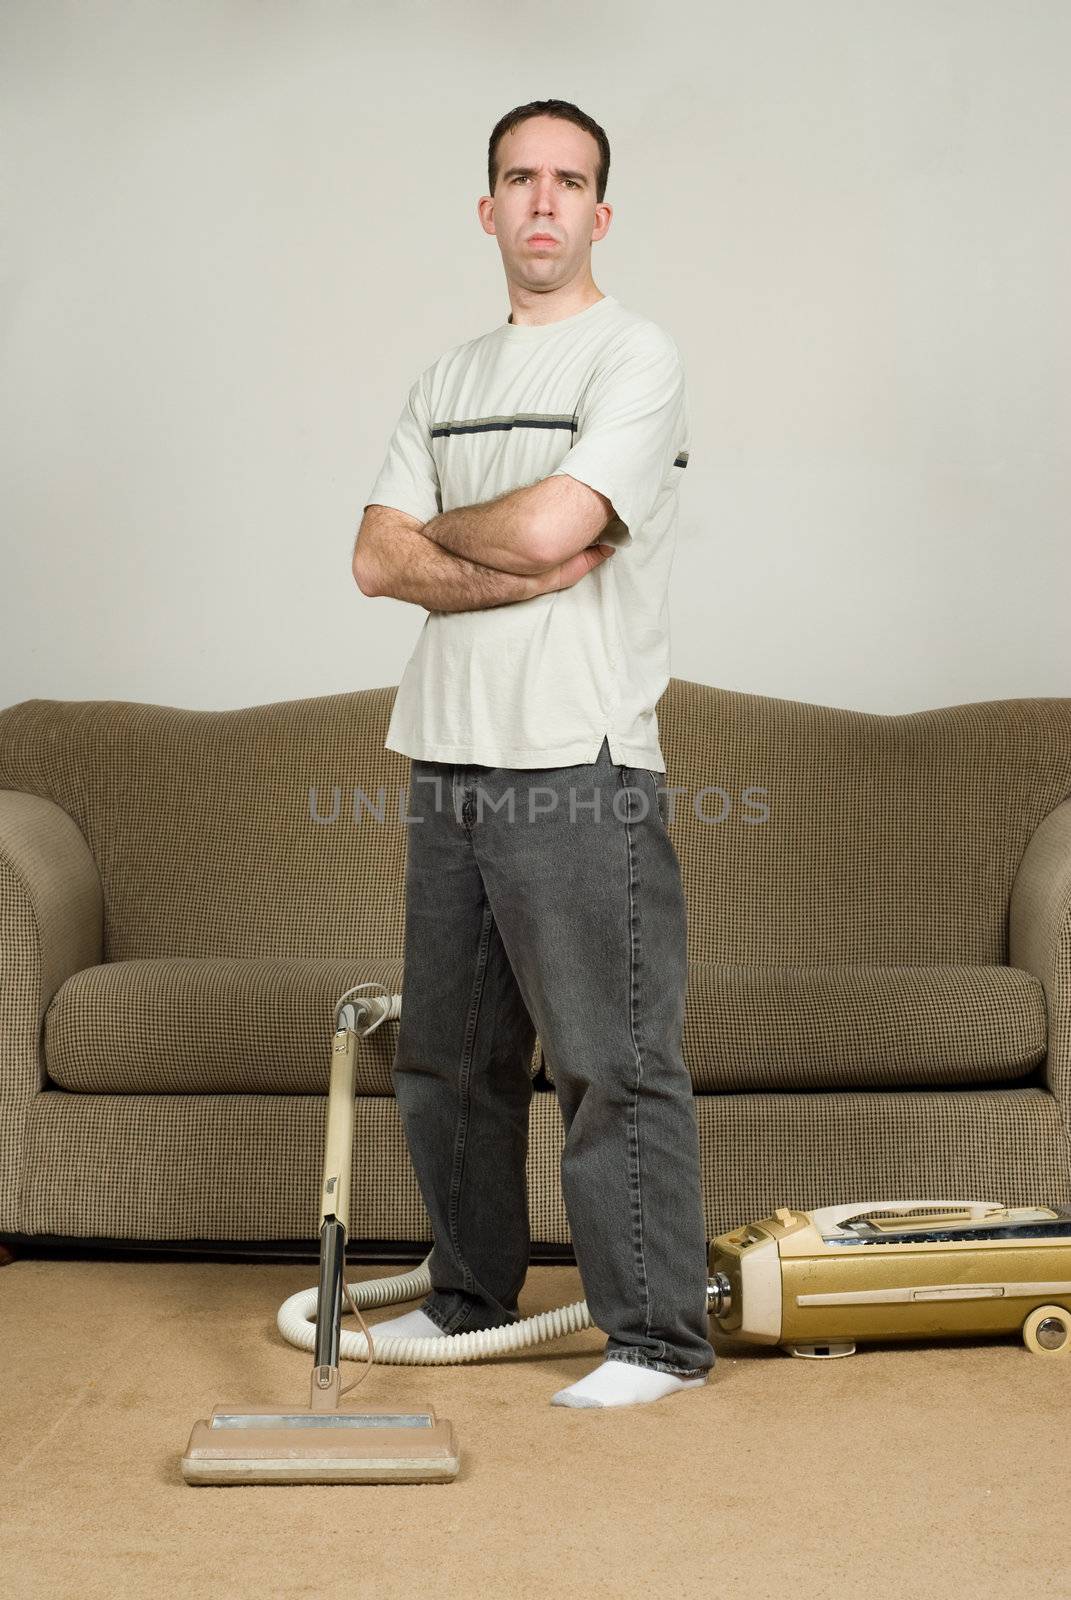 Full body view of a young man standing with his arms crossed, refusing to do anymore household chores